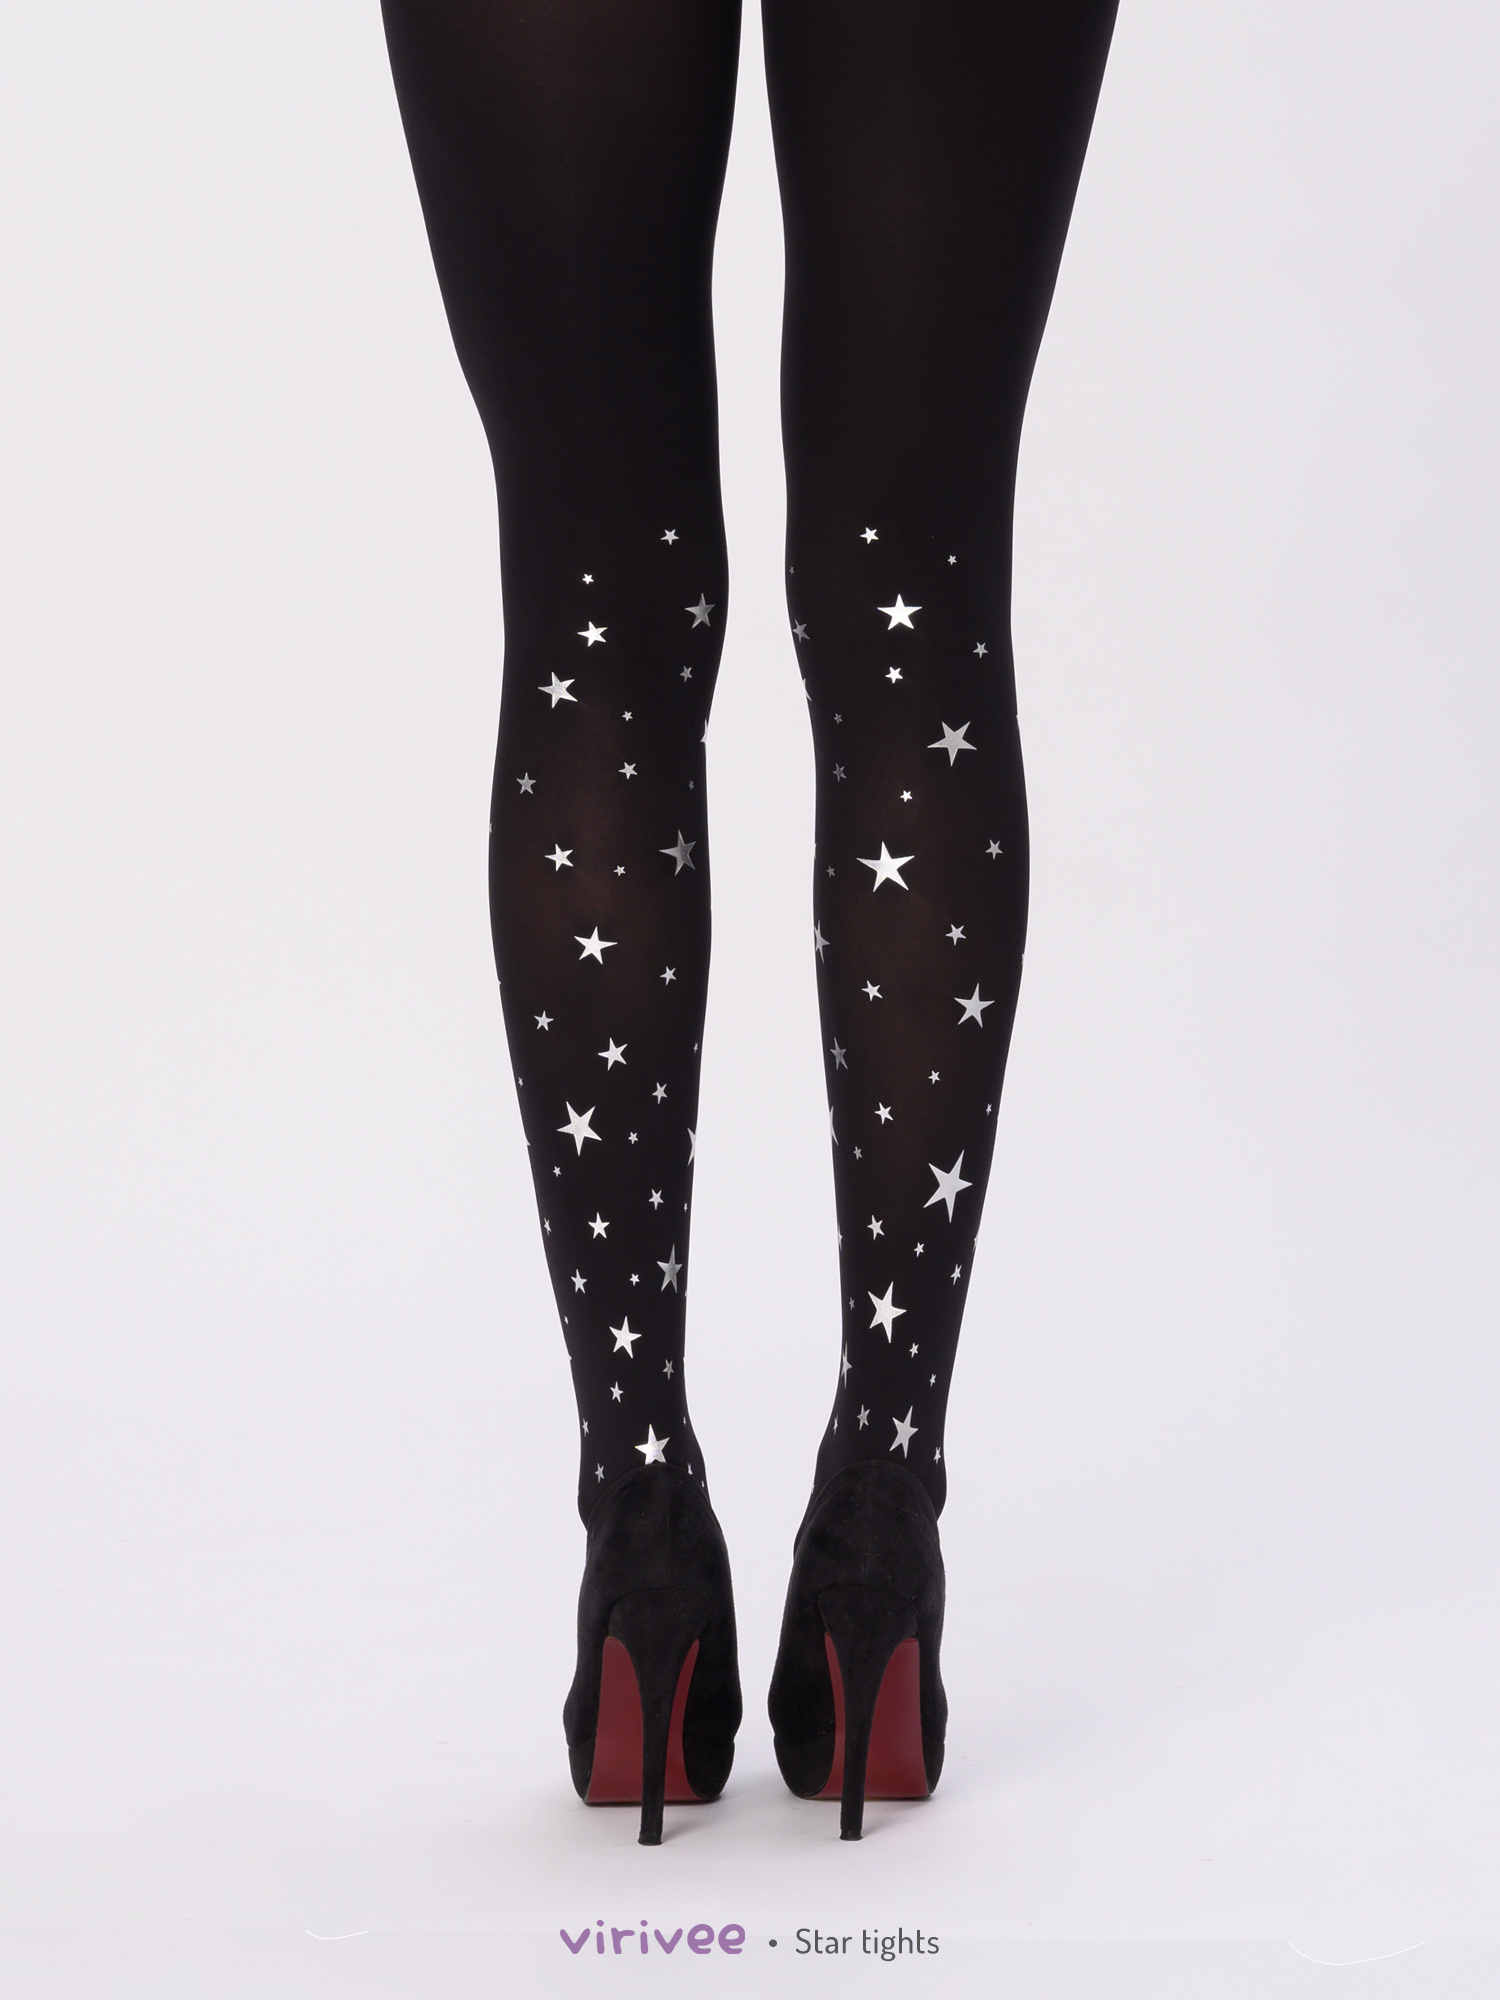 Star tights with gold or silver print - Virivee Tights - Unique tights ...